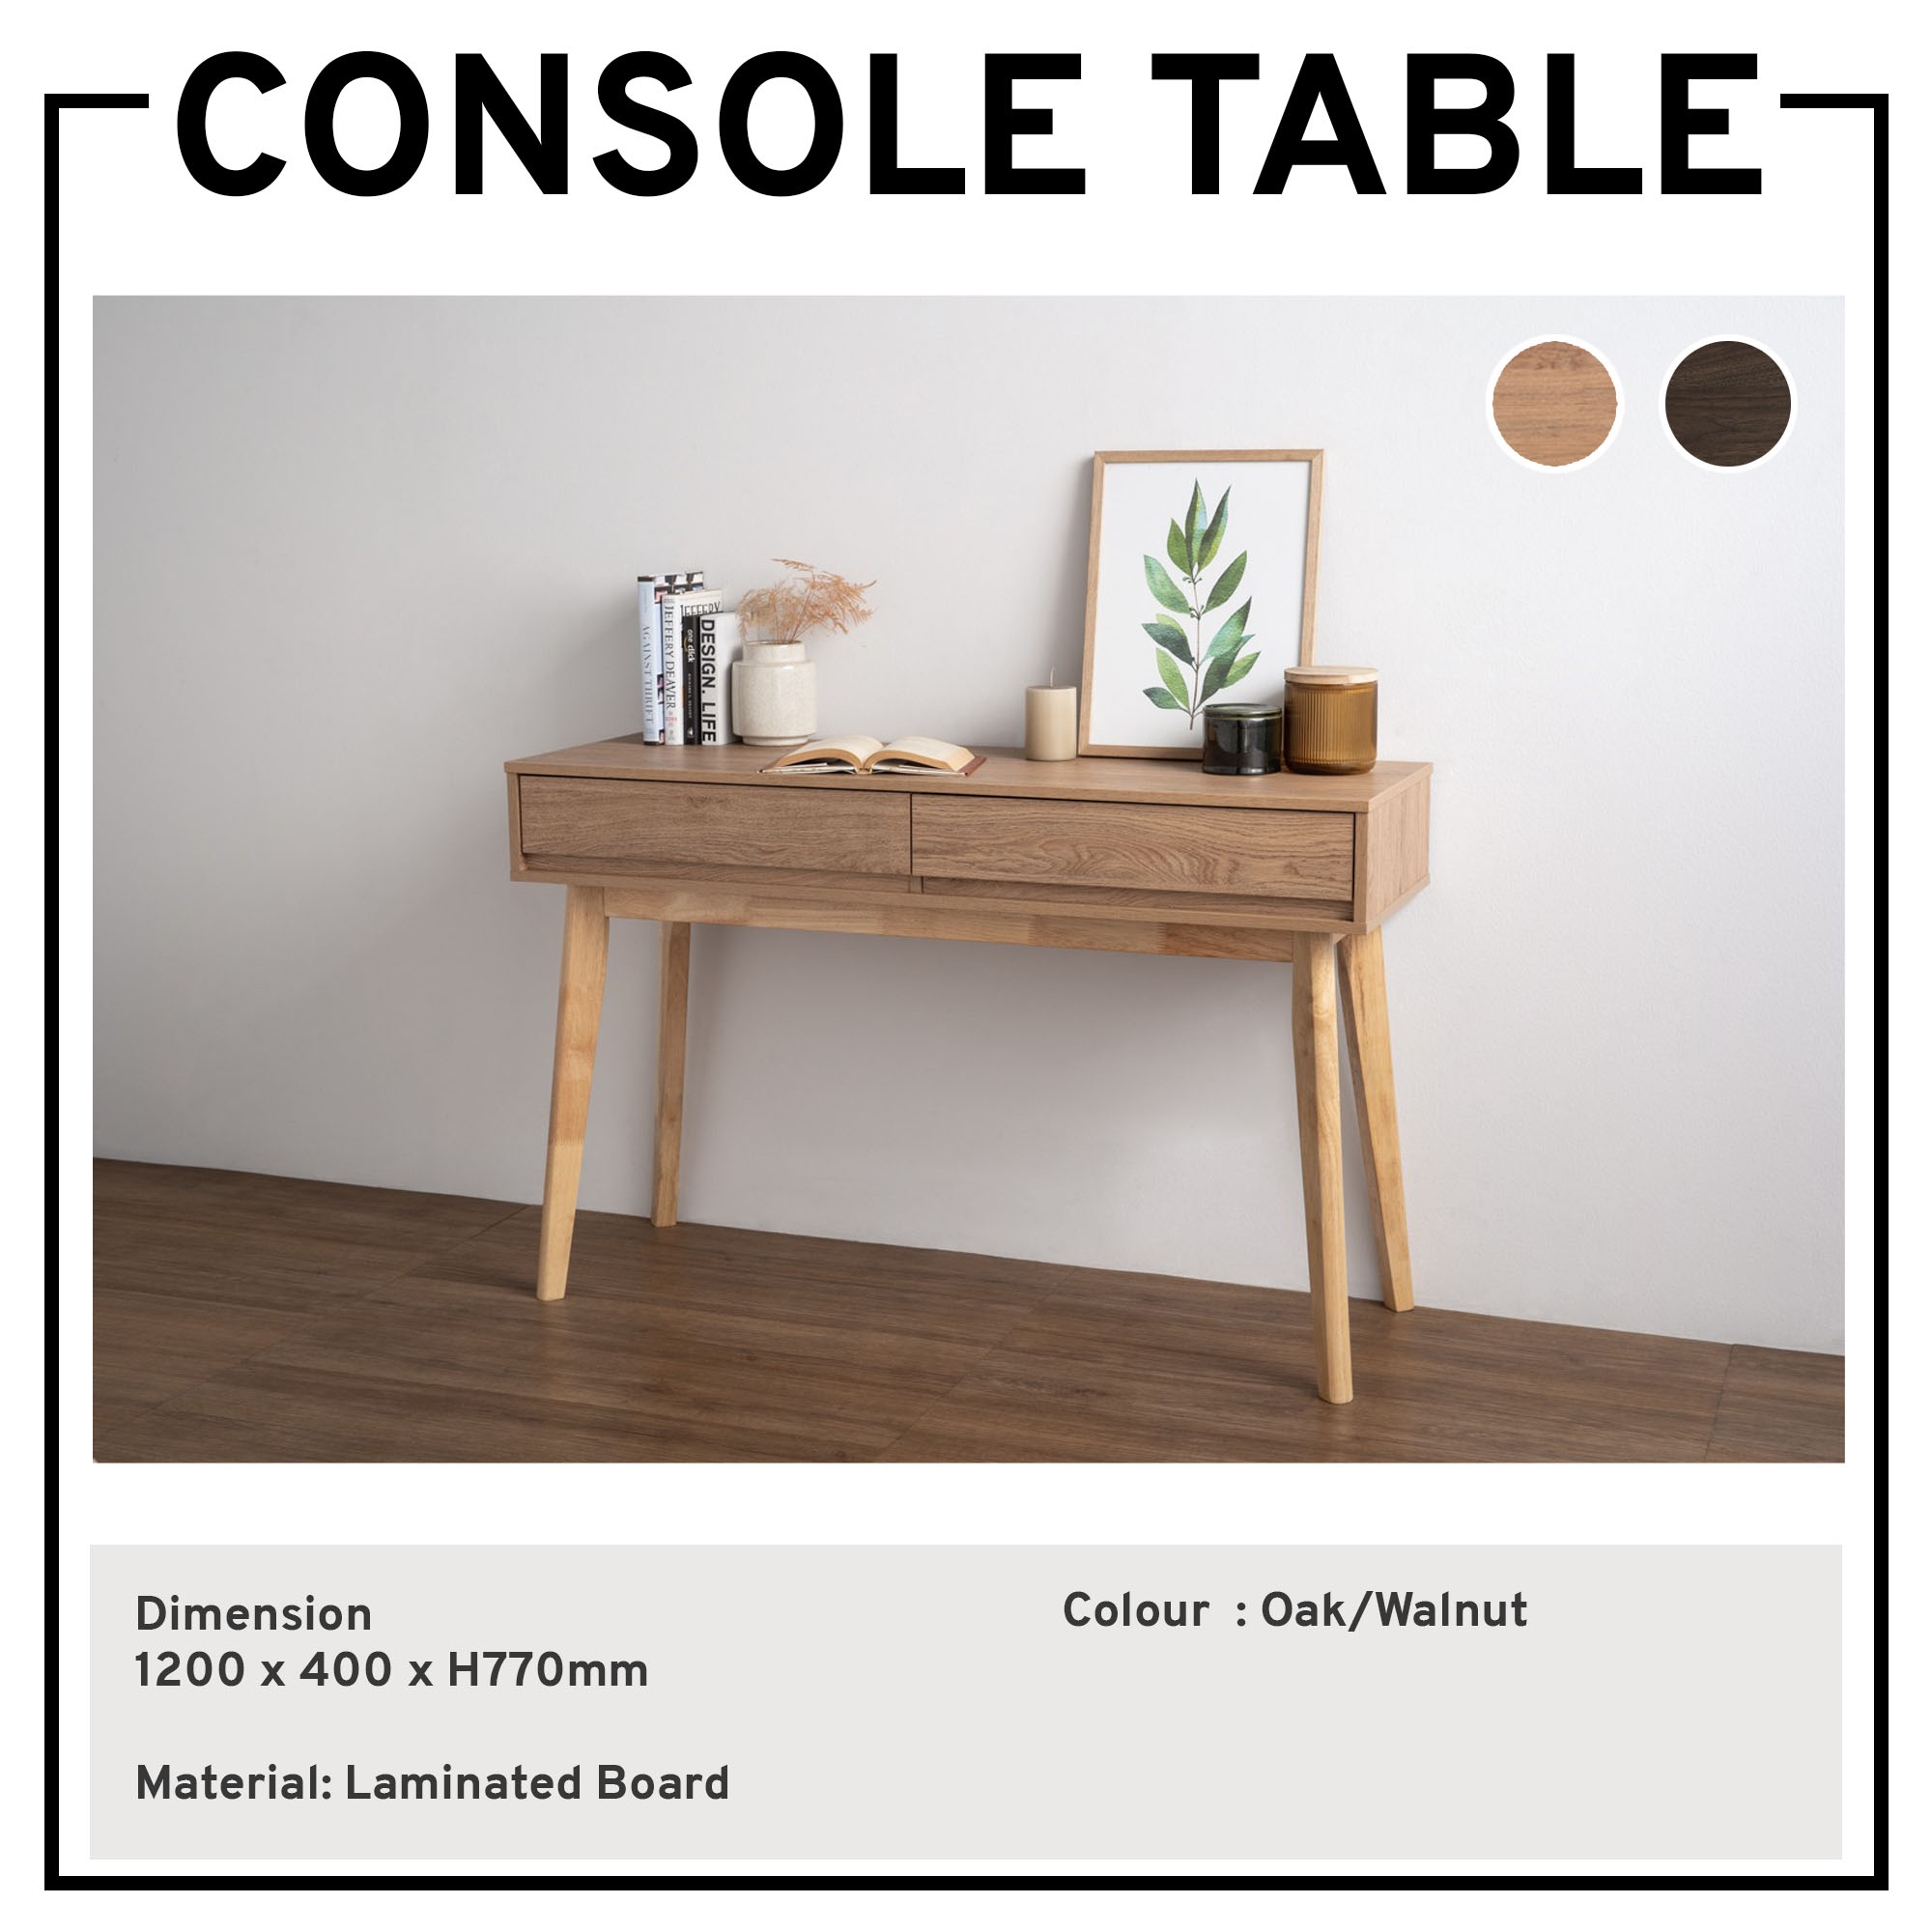 7 C console table